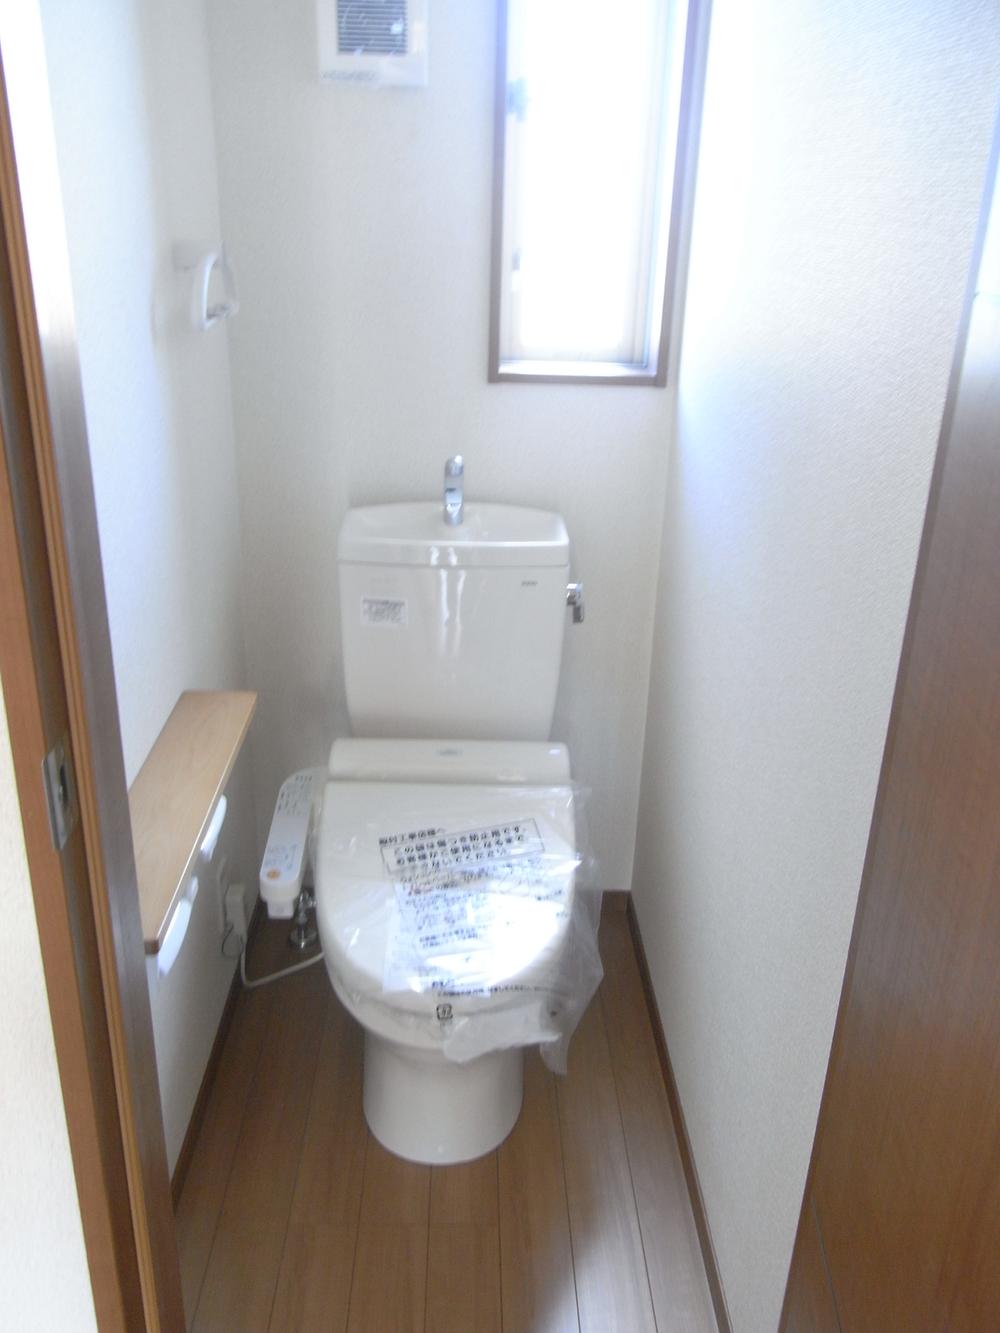 Toilet. All building, Same specifications